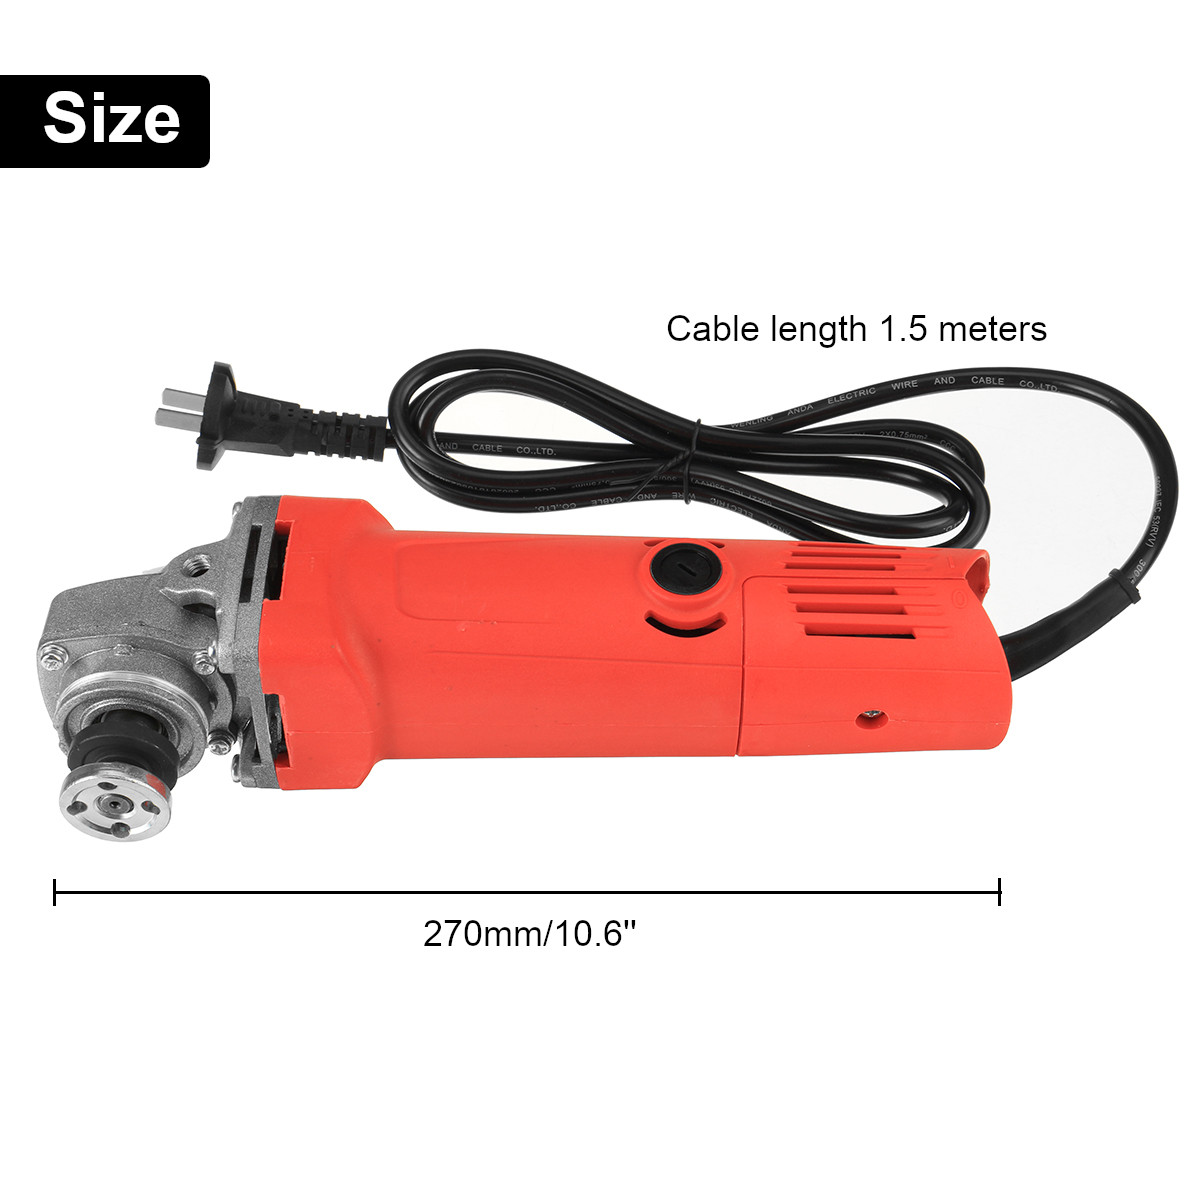 850W-100mm-11000rpm-Electric-Angle-Grinder-Cutting-Machine-Handheld-Polishing-Grinding-Carving-Tool-1736781-7